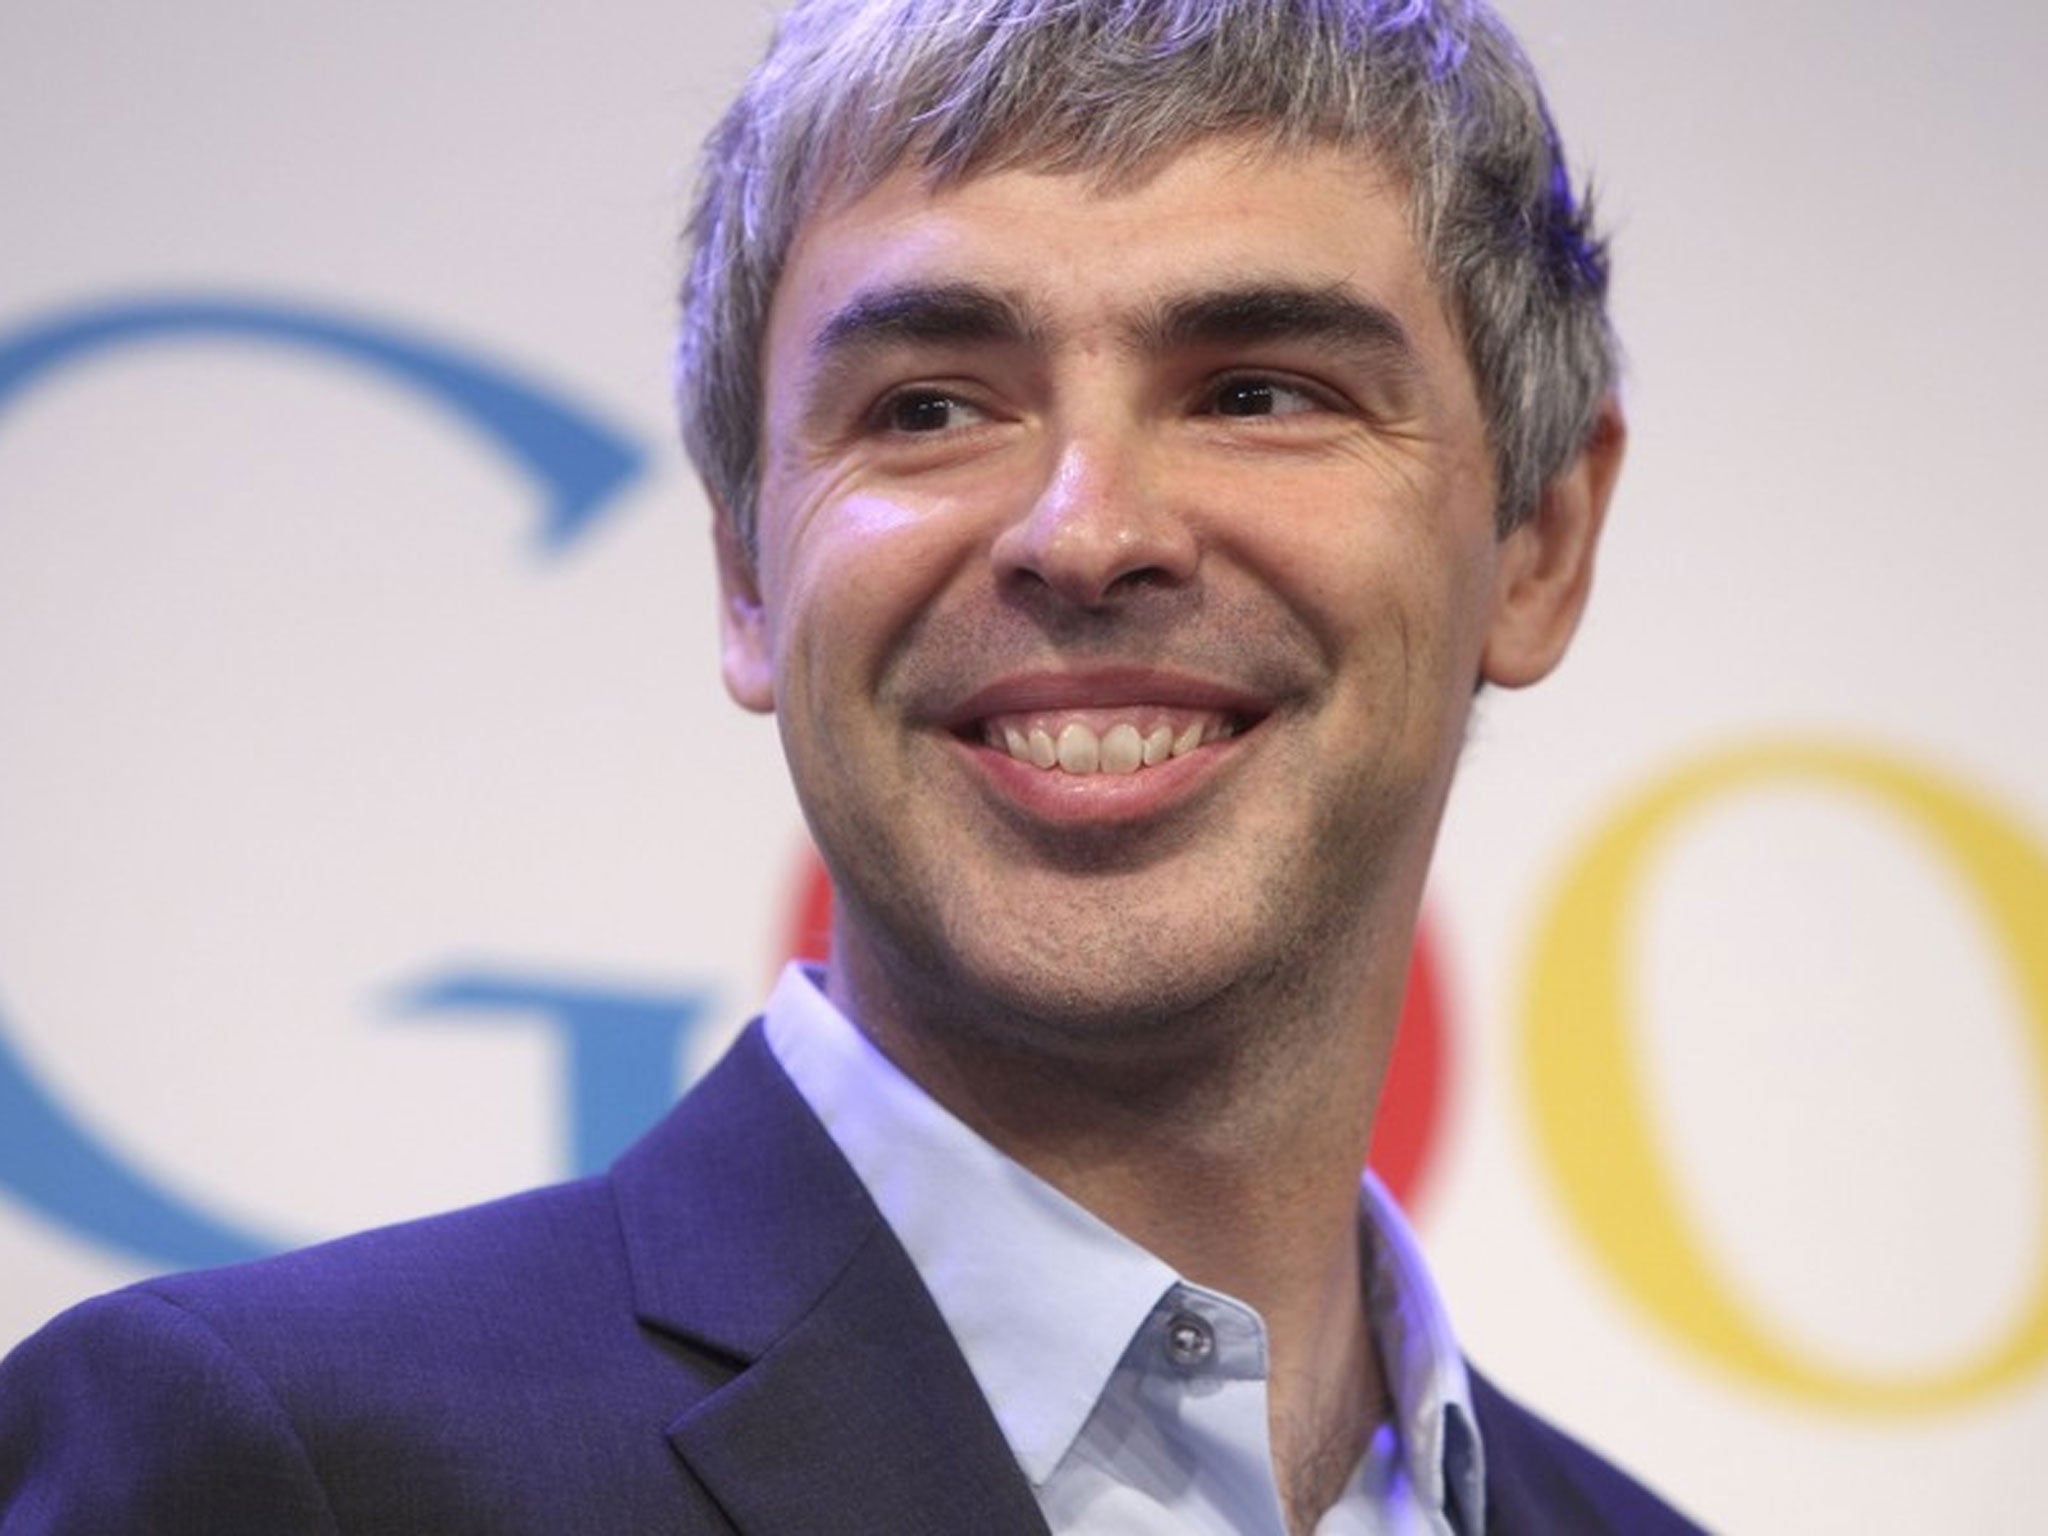 Google chief executive Larry Page